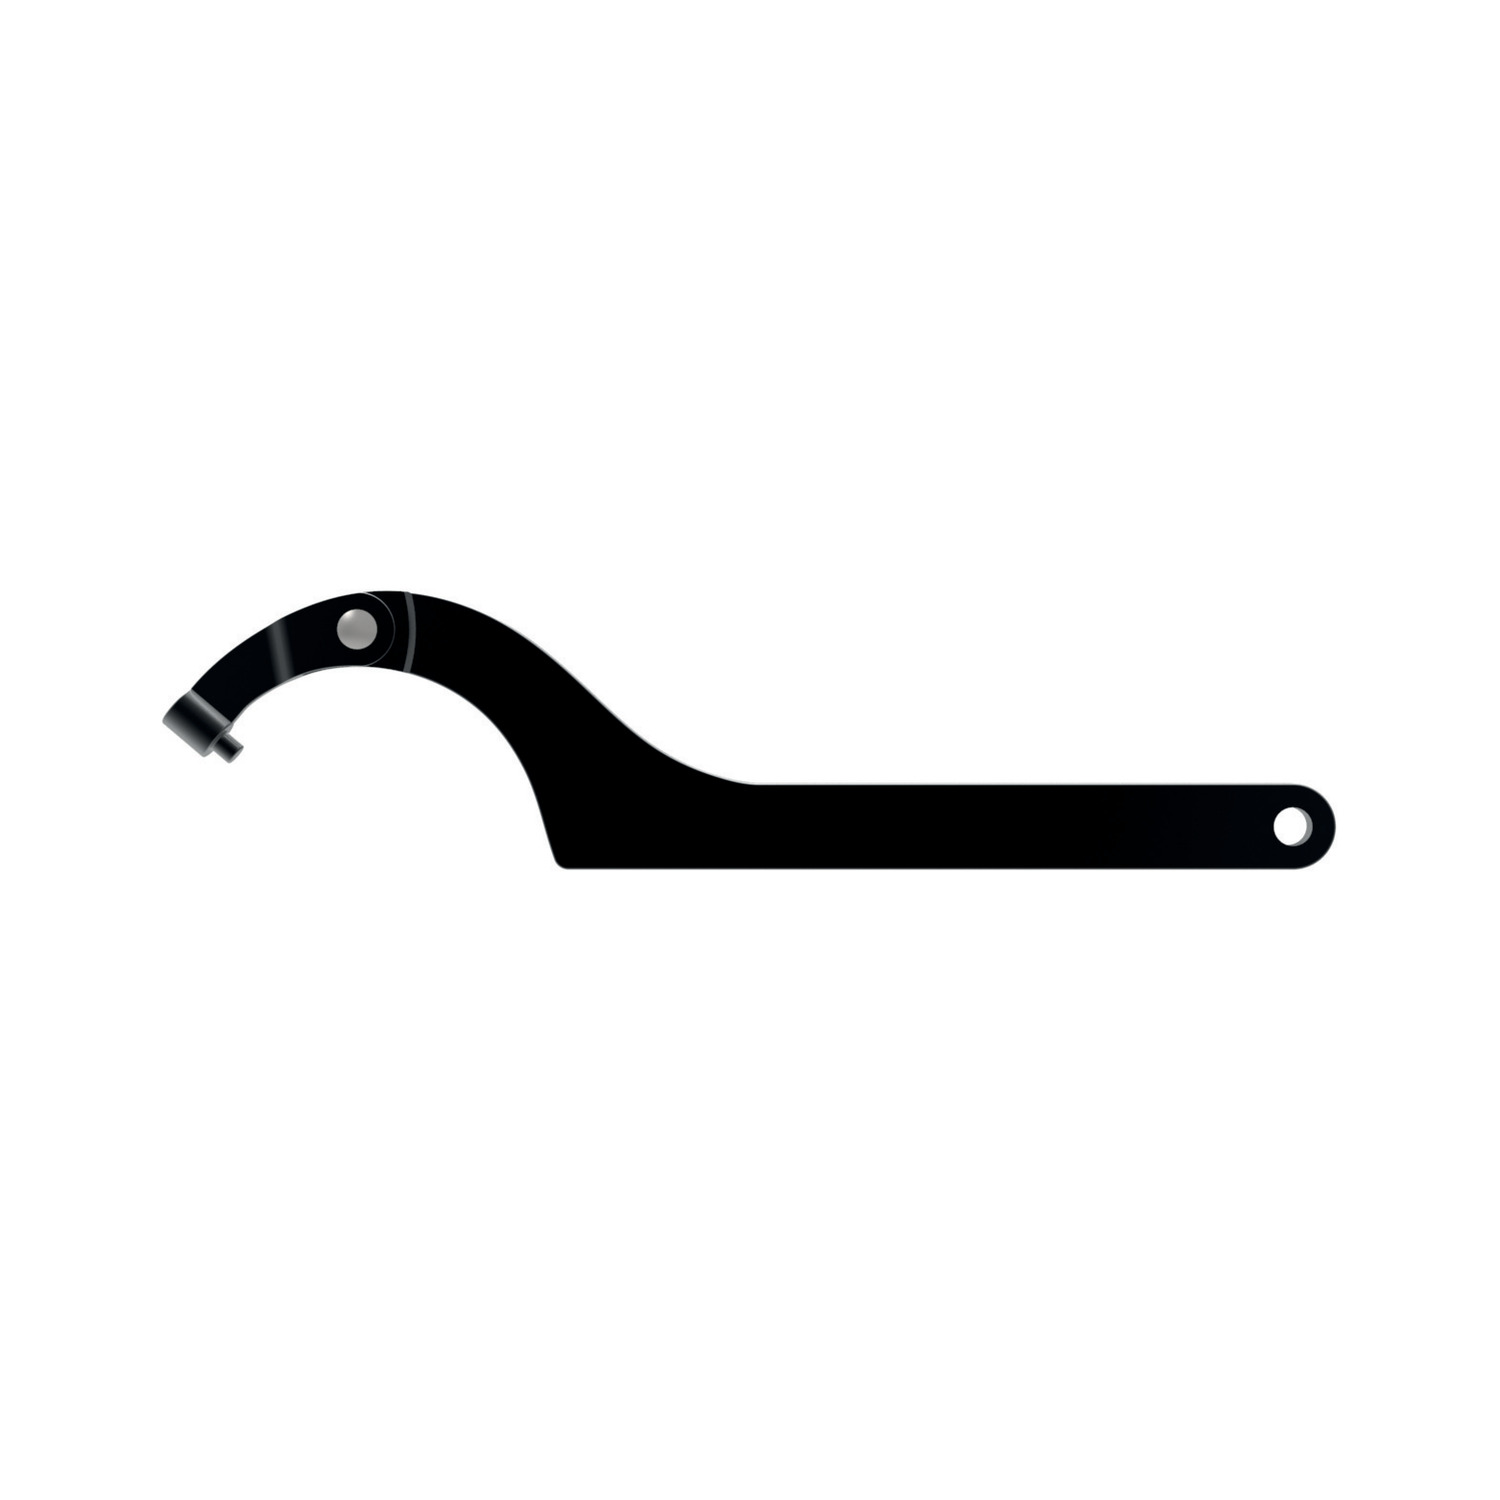 95151.W0061 Hook Spanners, With Pin Nose - Steel. Blackened - 35-60 - 5,0 - 175